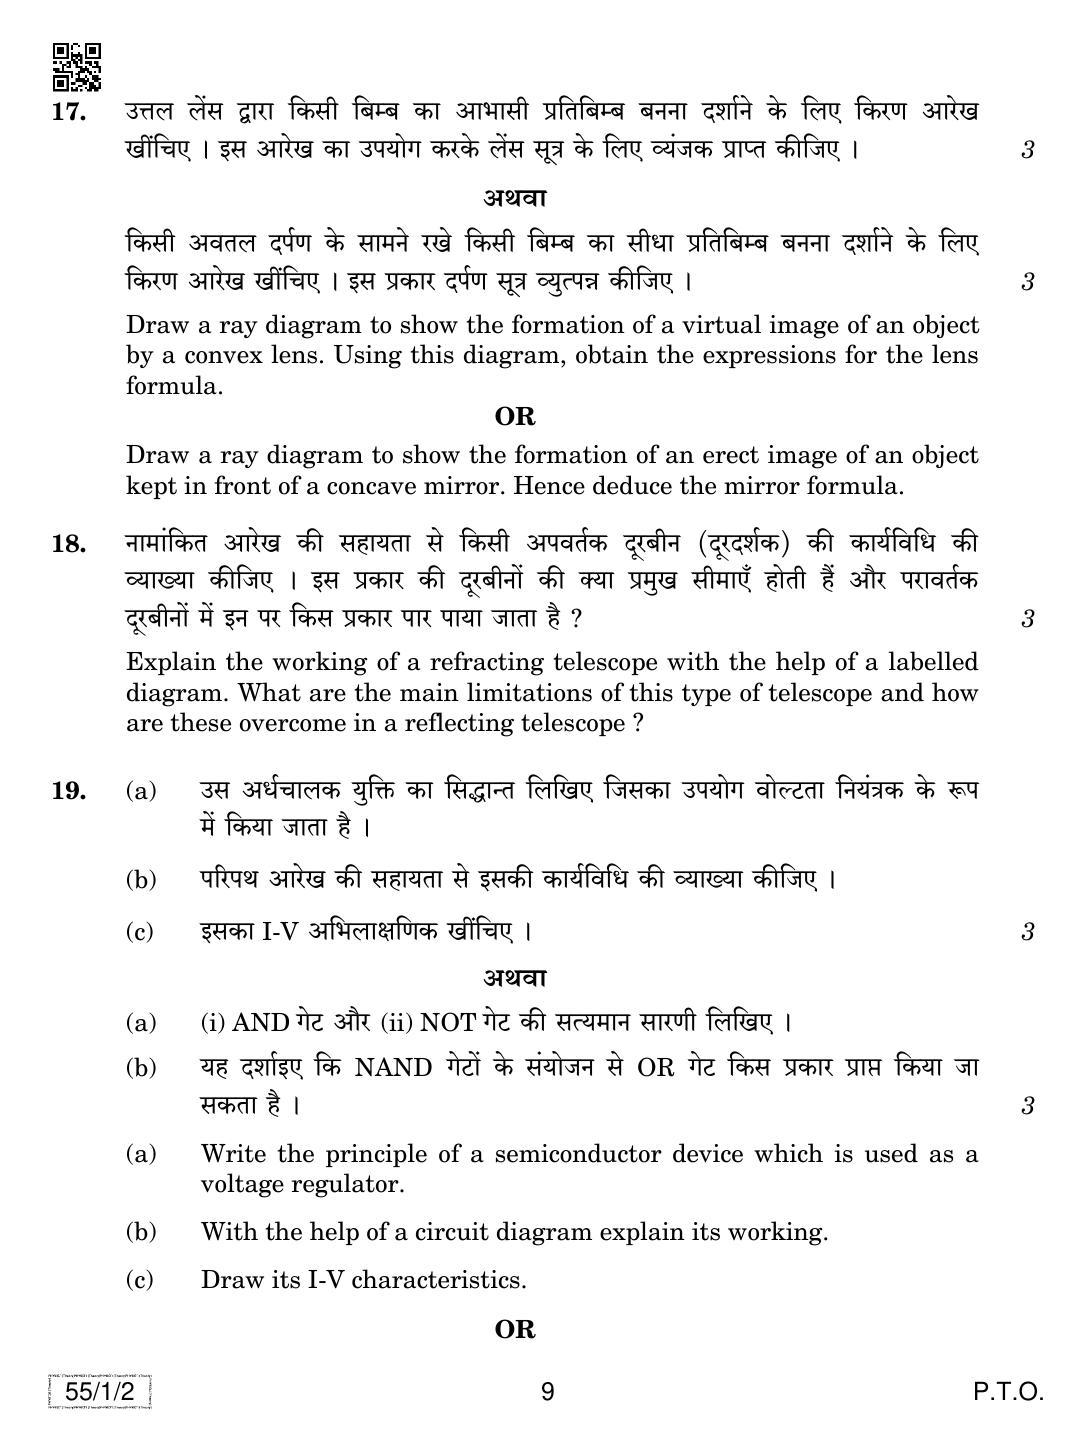 CBSE Class 12 55-1-2 PHYSICS 2019 Compartment Question Paper - Page 9